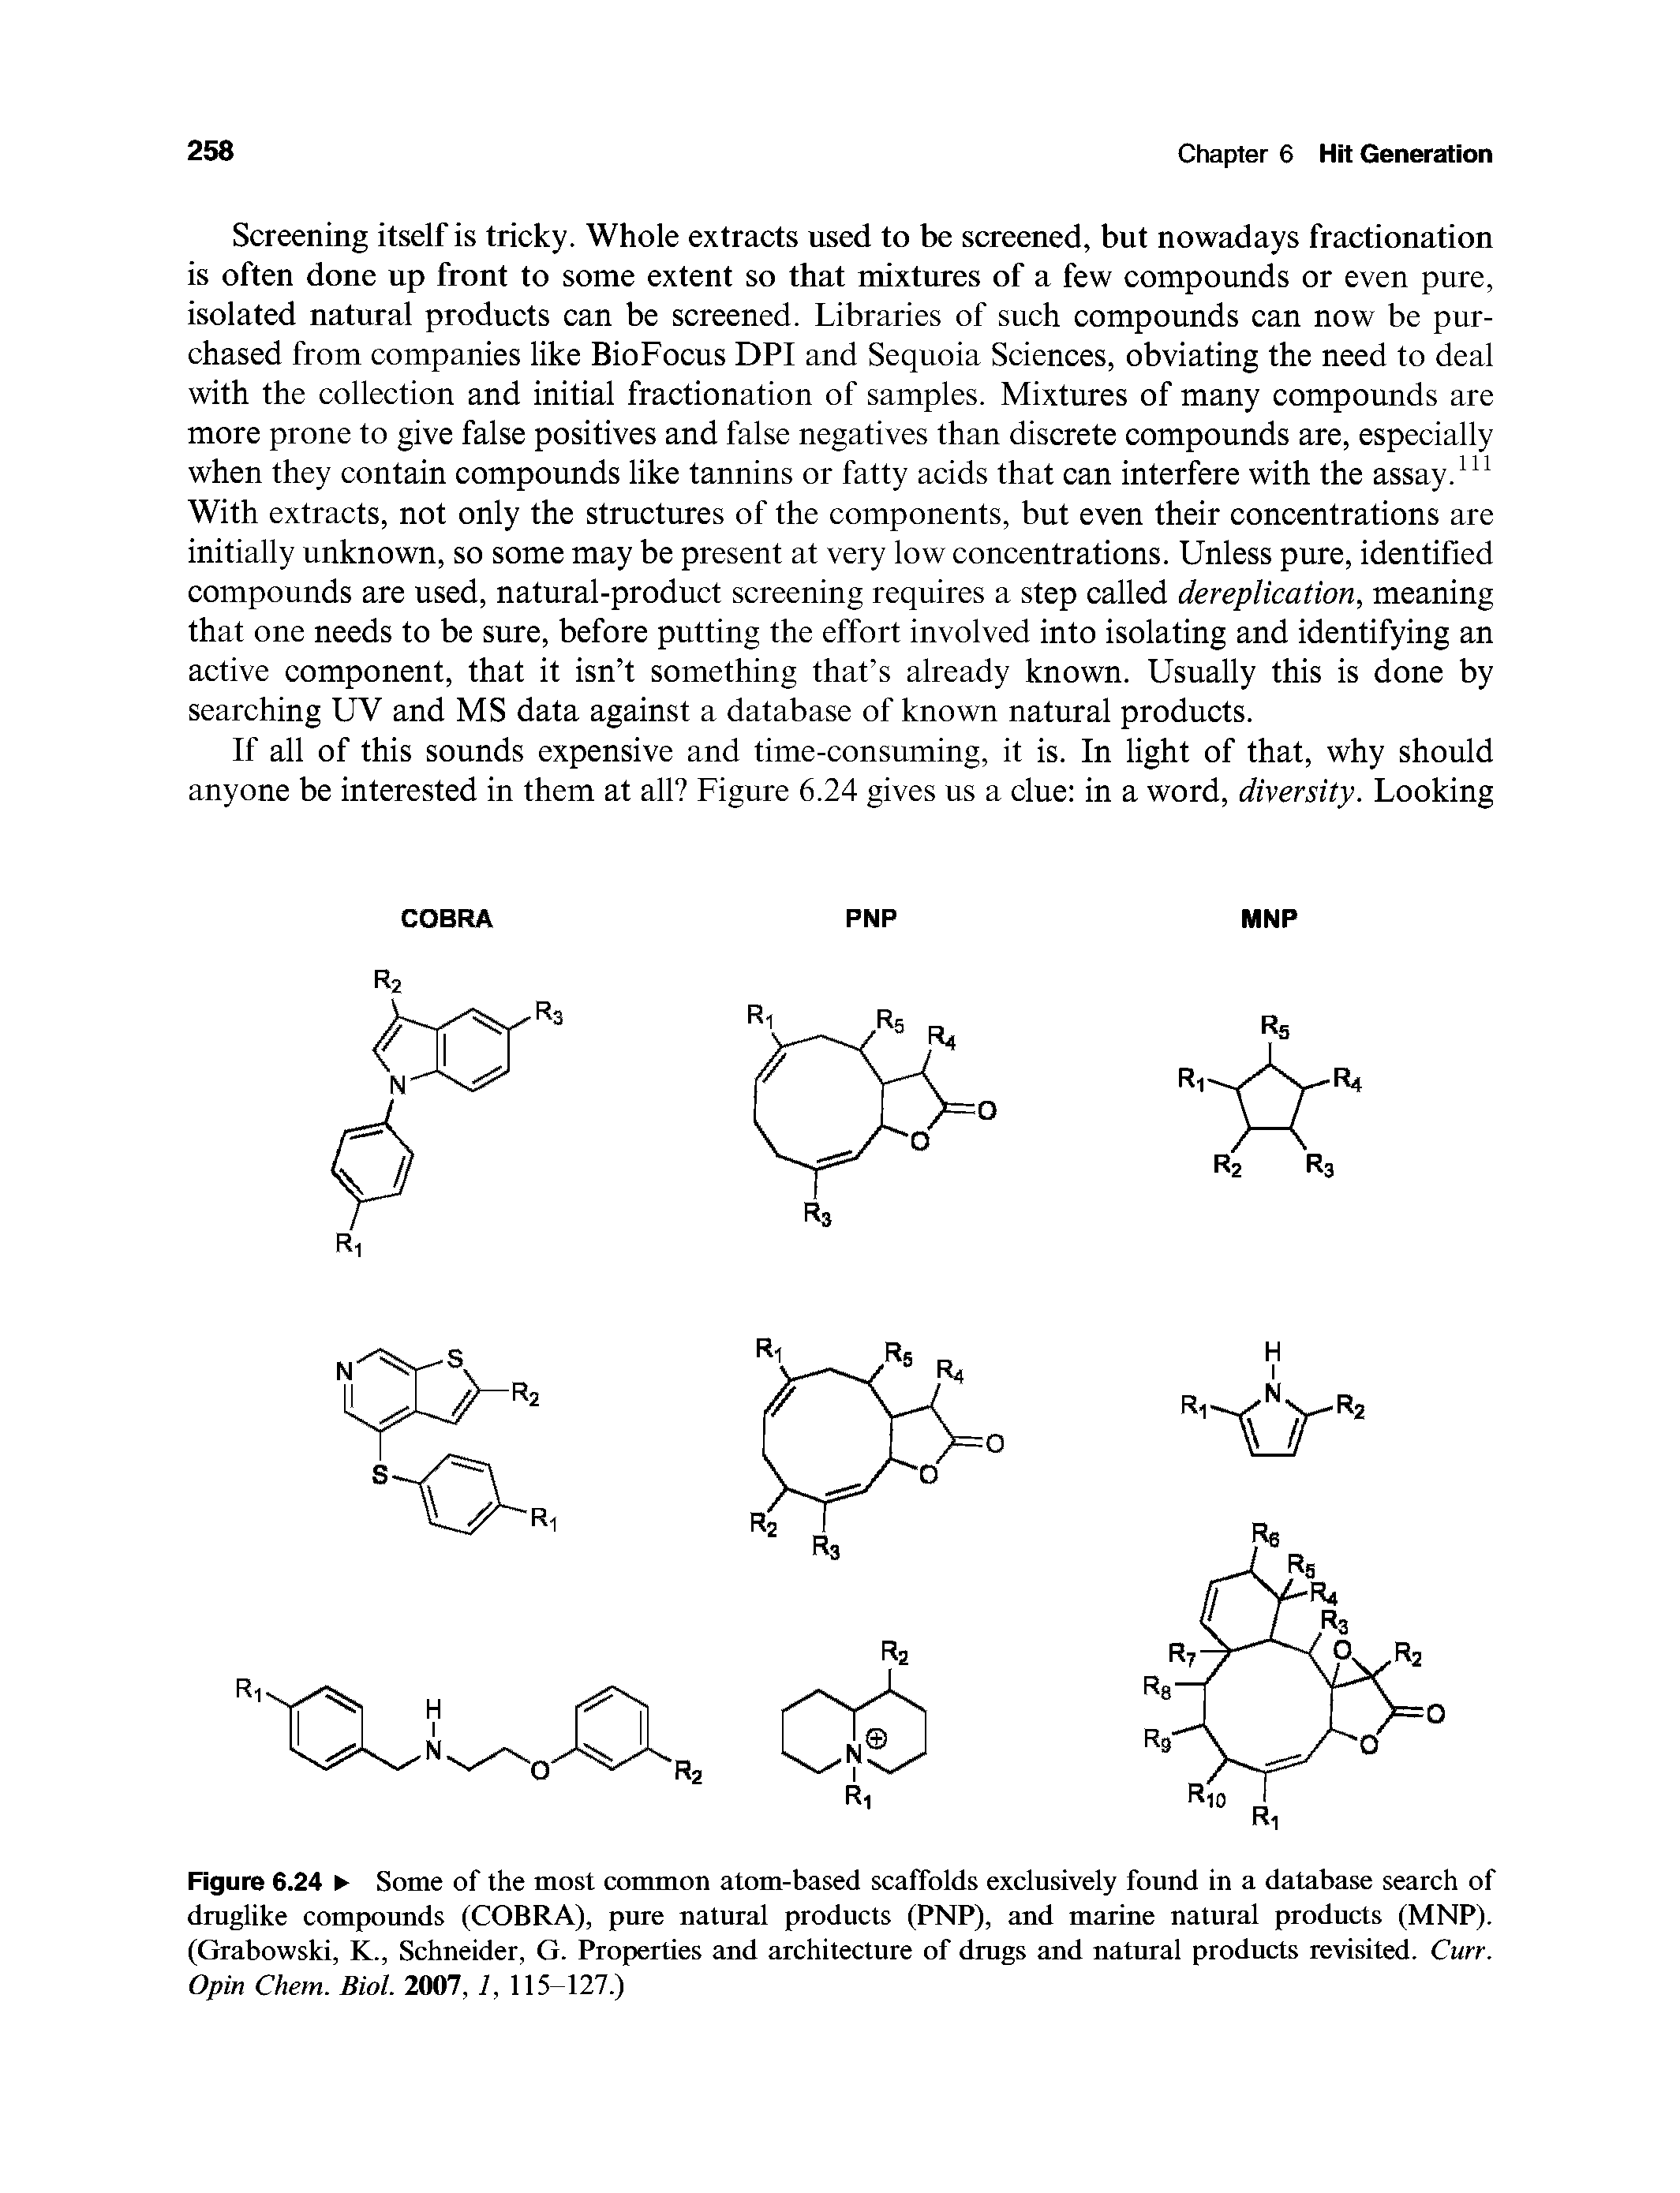 Figure 6.24 Some of the most common atom-based scaffolds exclusively found in a database search of druglike compounds (COBRA), pure natural products (PNP), and marine natural products (MNP). (Grabowski, K., Schneider, G. Properties and architecture of drugs and natural products revisited. Curr. Opin Chem. Biol 2007, 1, 115-127.)...